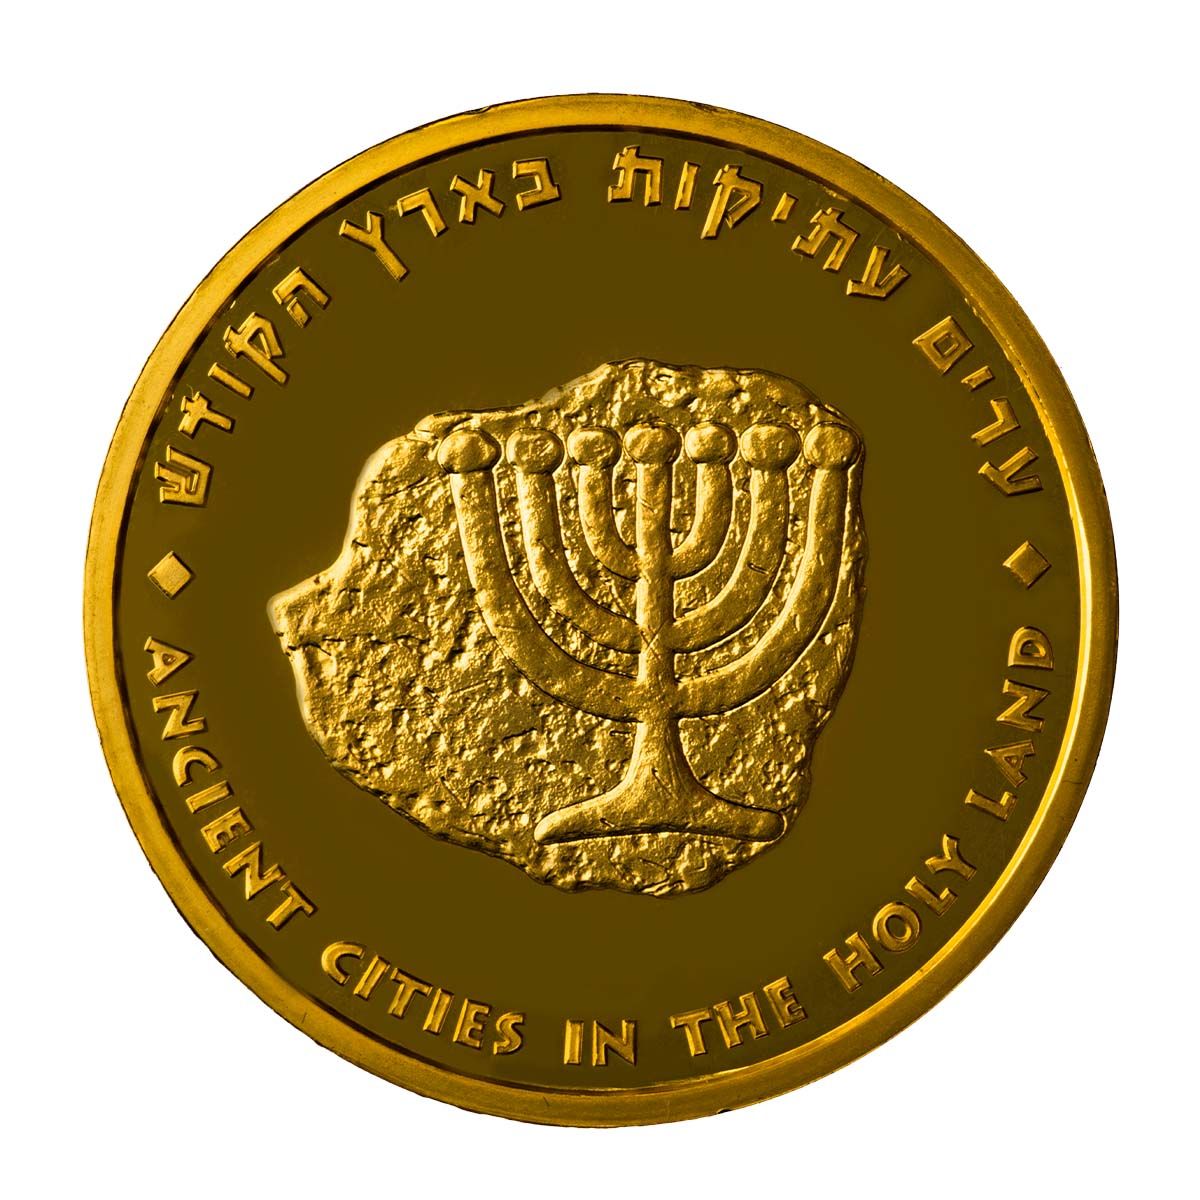 Picture of State of Israel Coins 33125320 32 mm The Old City Of Tiberia Pure Medal Gold Coin